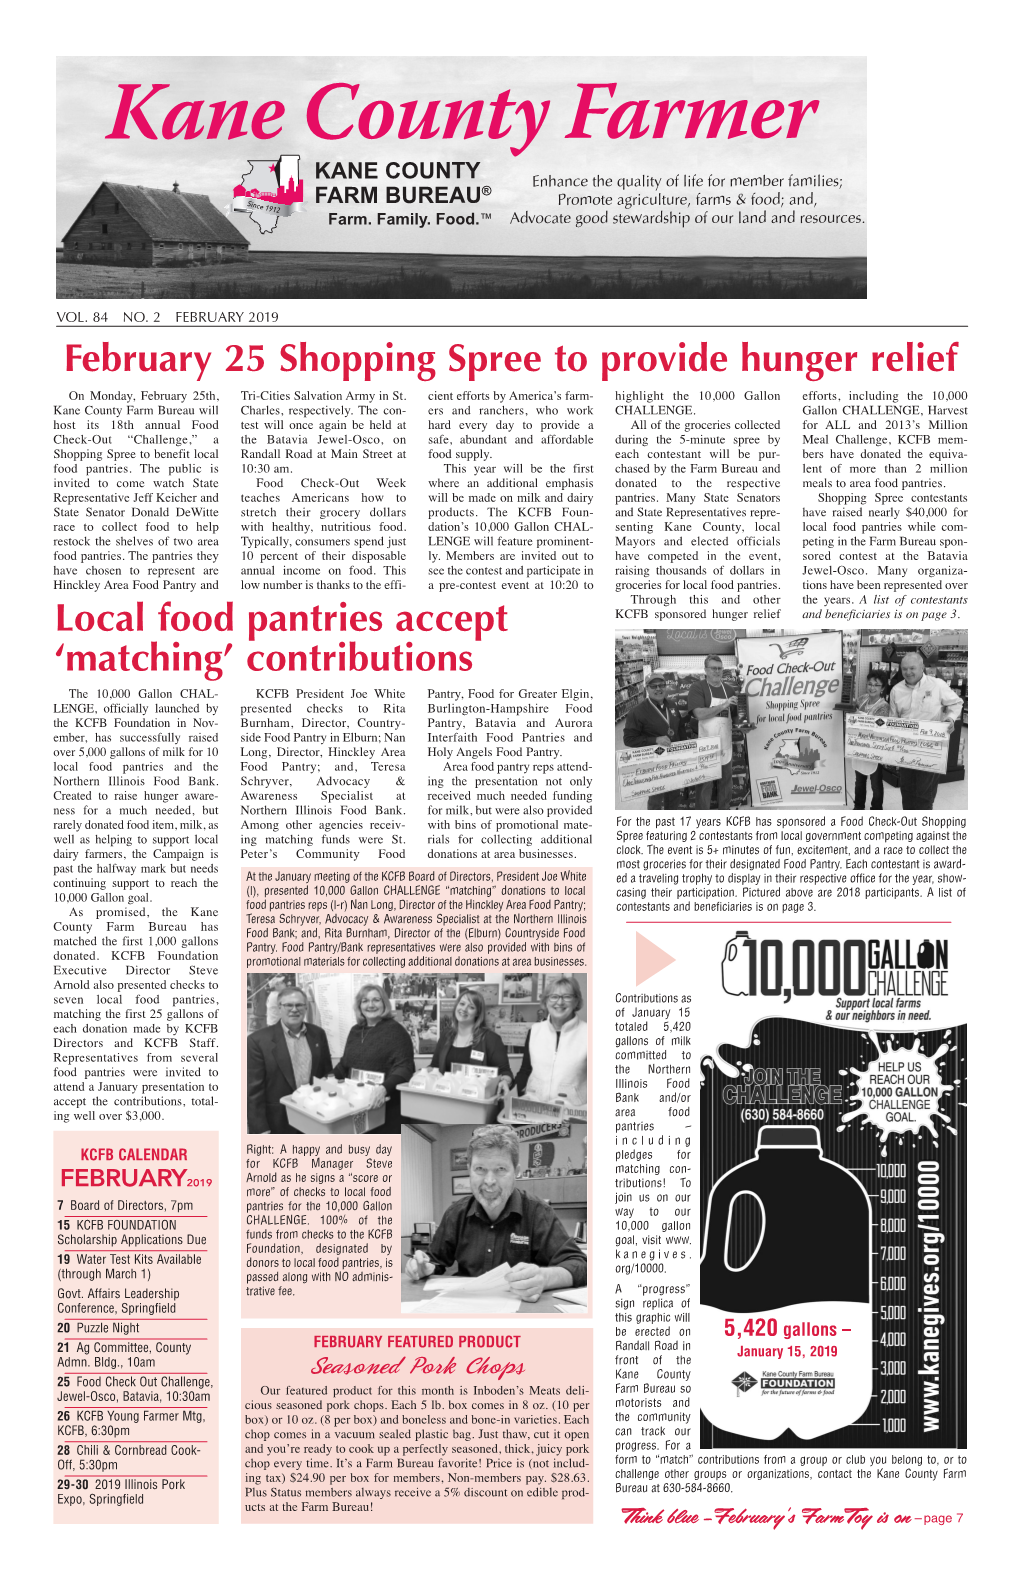 February 25 Shopping Spree to Provide Hunger Relief Local Food